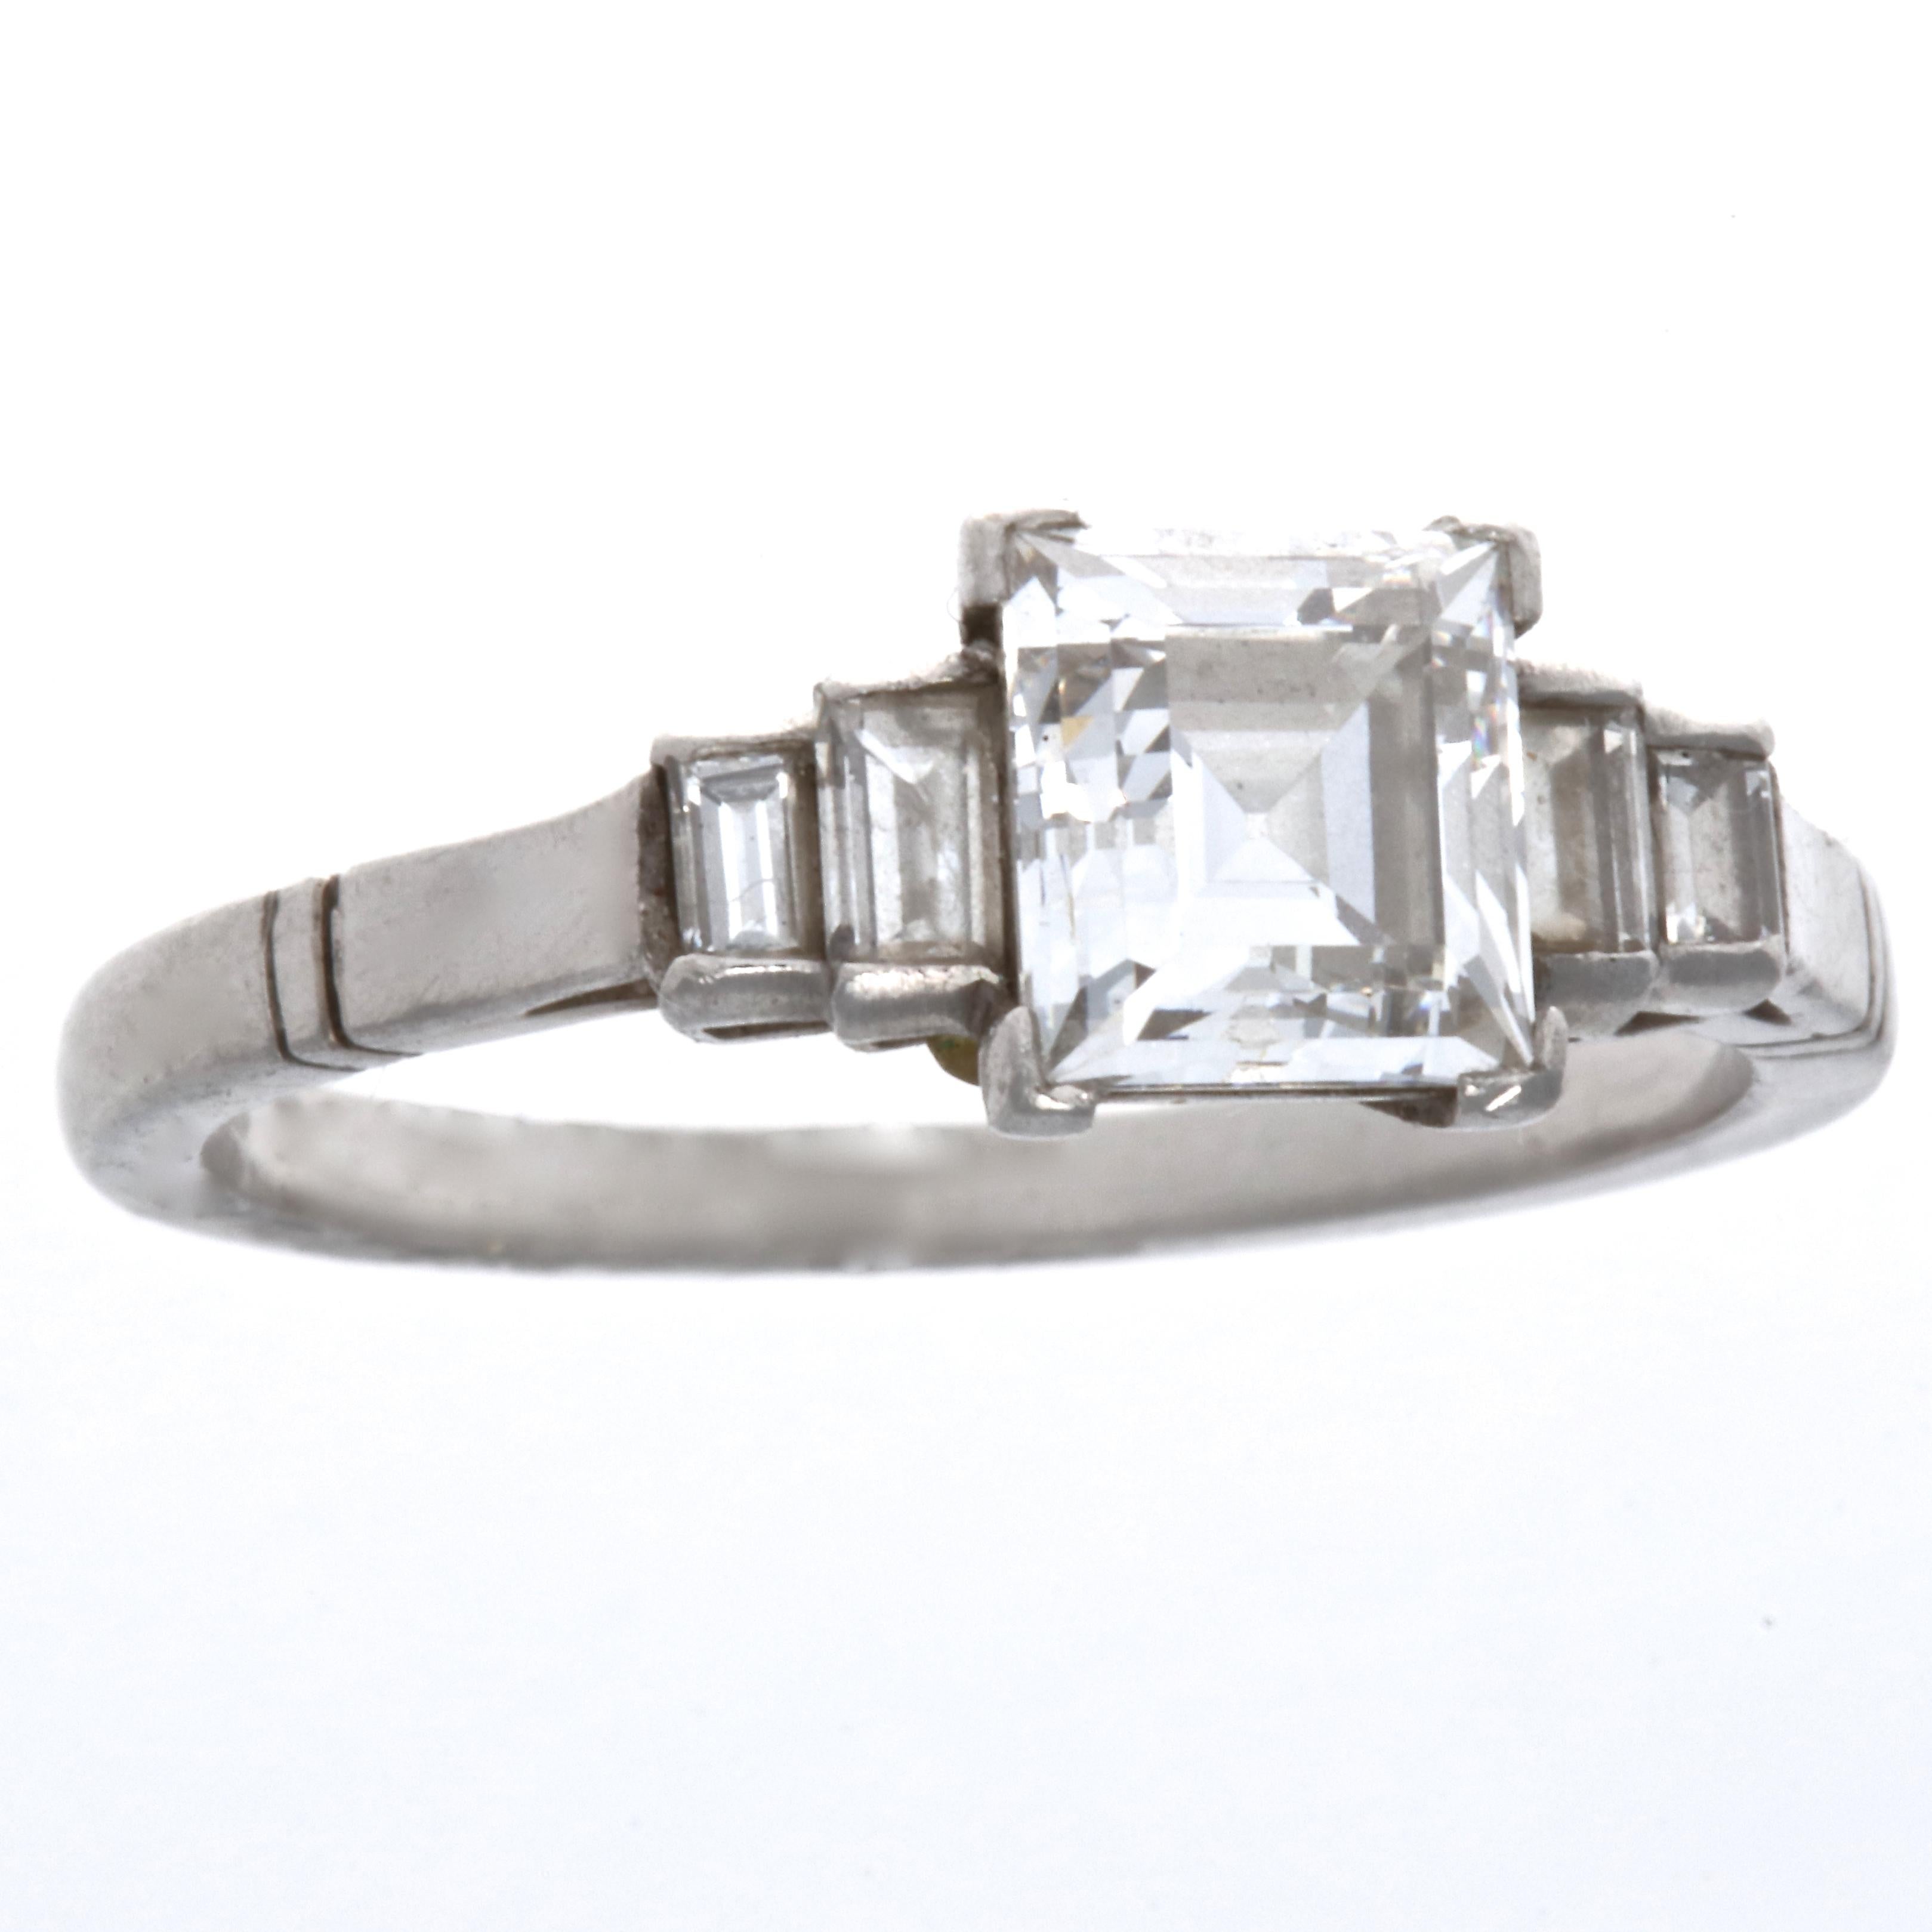 This ring is a reminder of the enduring creativity of the Art Deco era. The Art Deco style carre cut diamond is GIA certified as 1.17 carats, E color VVS2 clarity. Accented with four emerald cut diamonds weighing approximately 0.35 carats G,H color